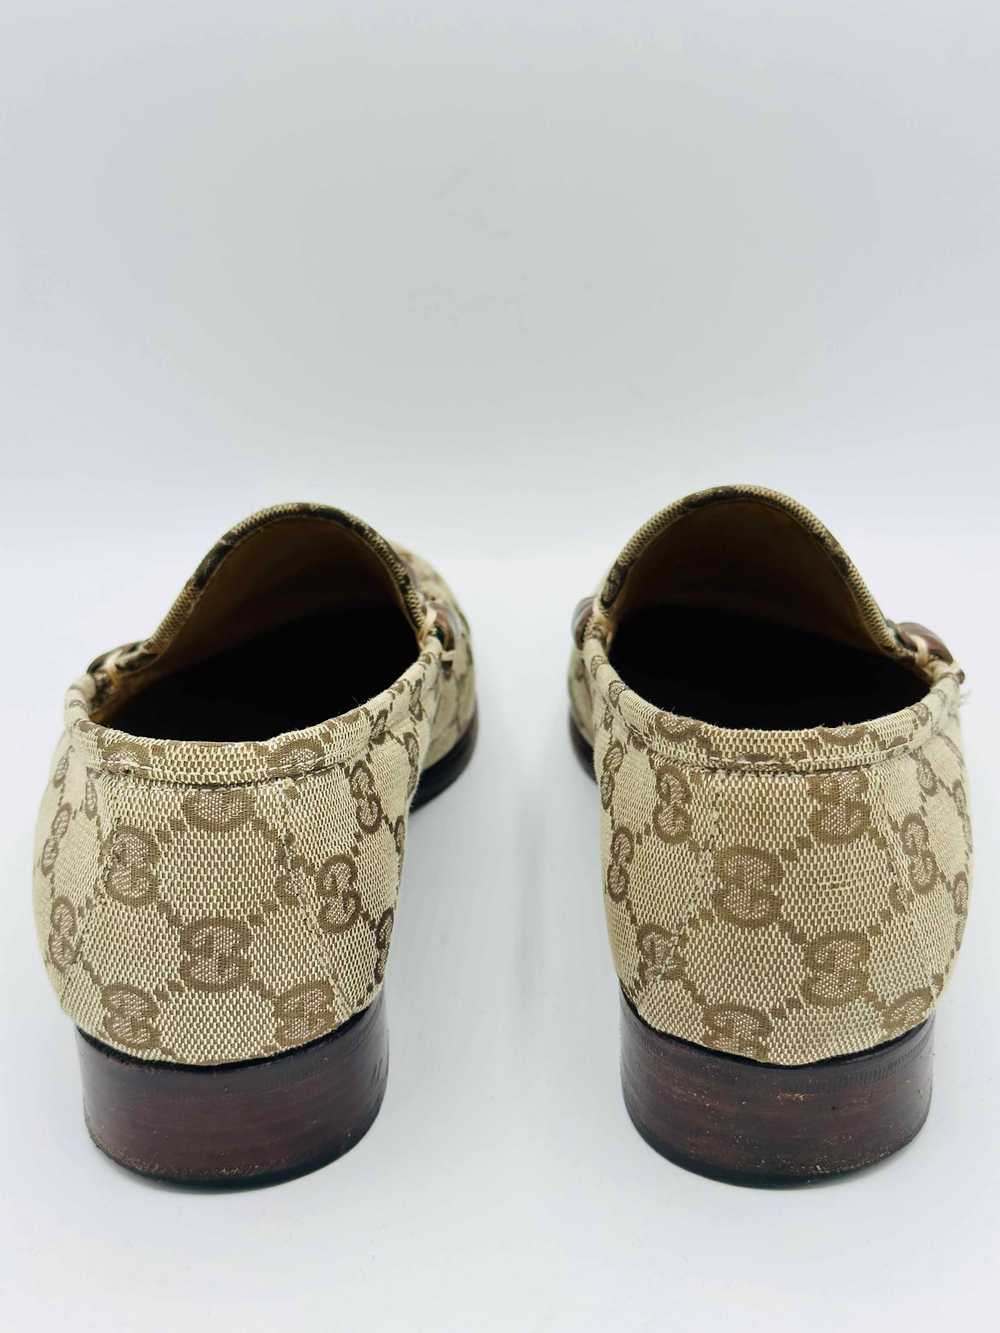 1970's Gucci Monogram Horse bit Loafers - image 4